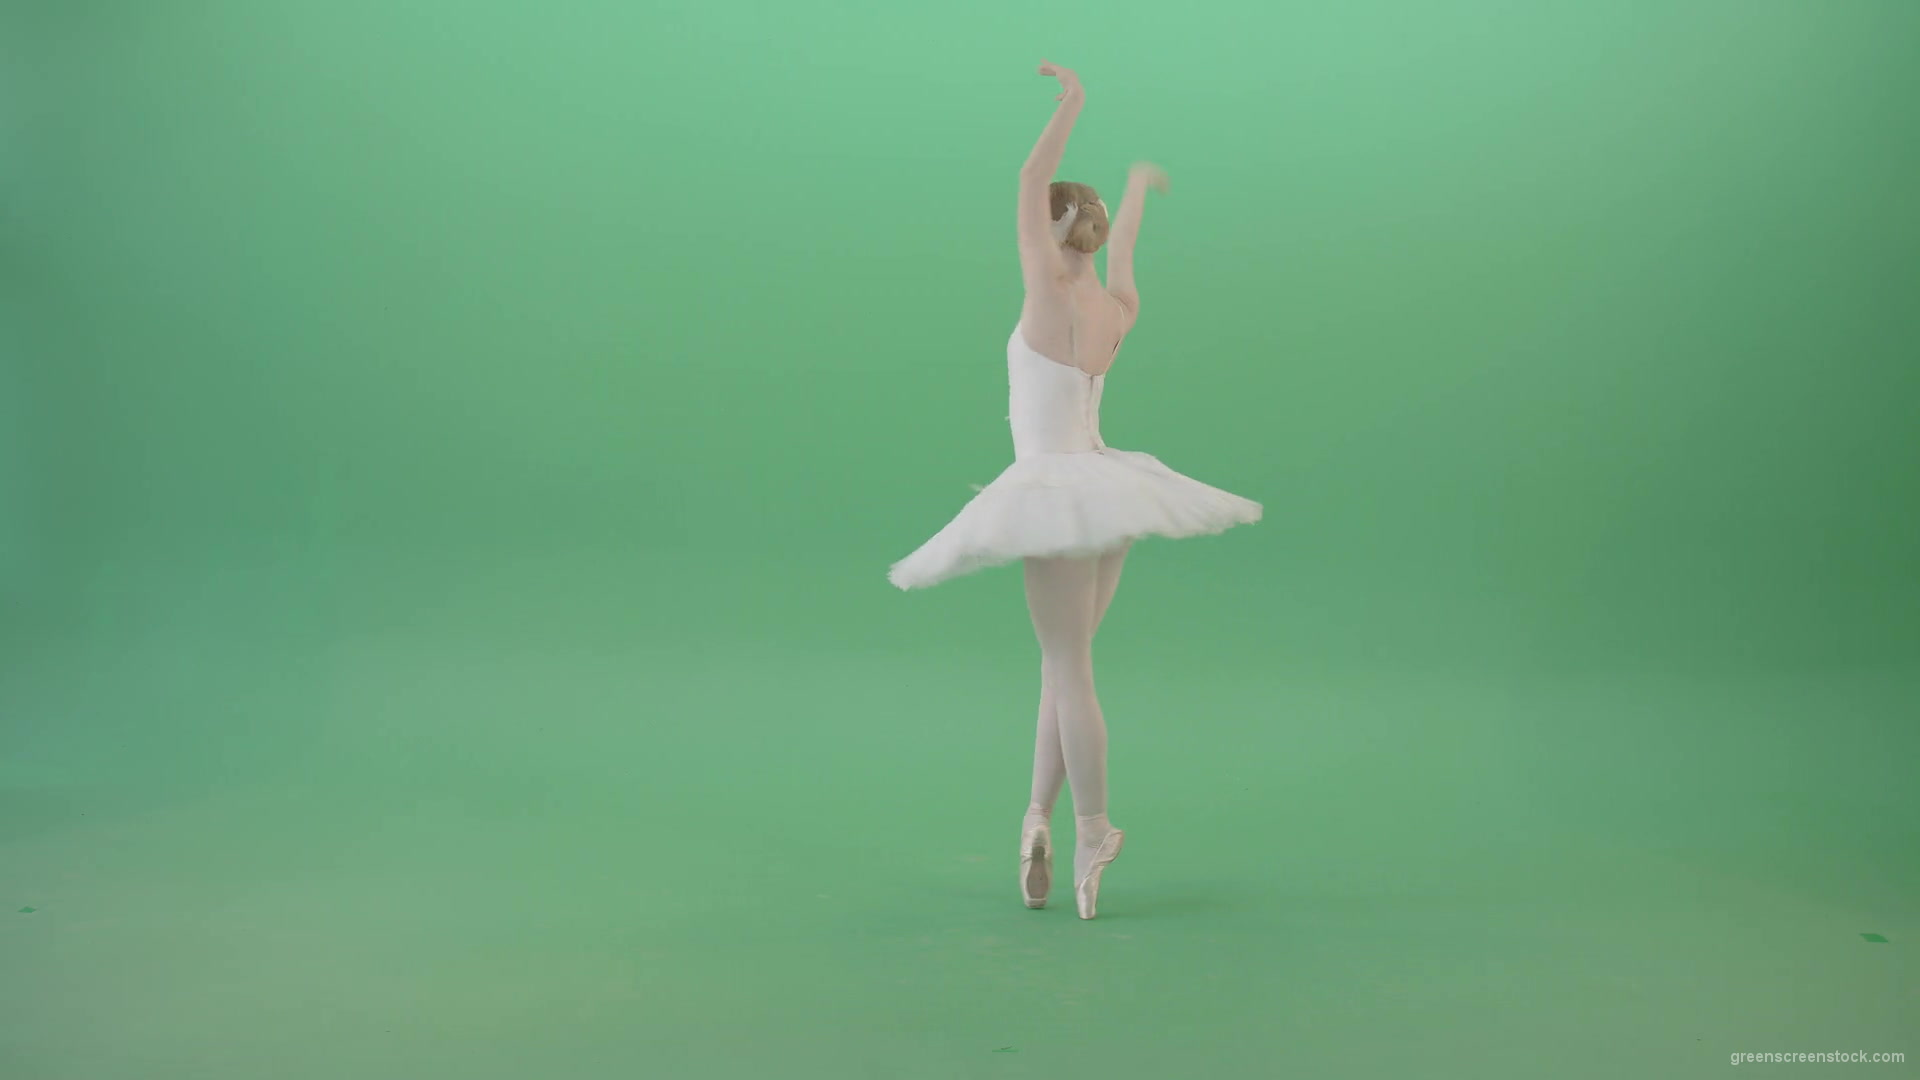 Back-side-view-ballet-dancing-tiny-girl-performs-in-green-screen-studio-4K-Video-Footage-1920_008 Green Screen Stock